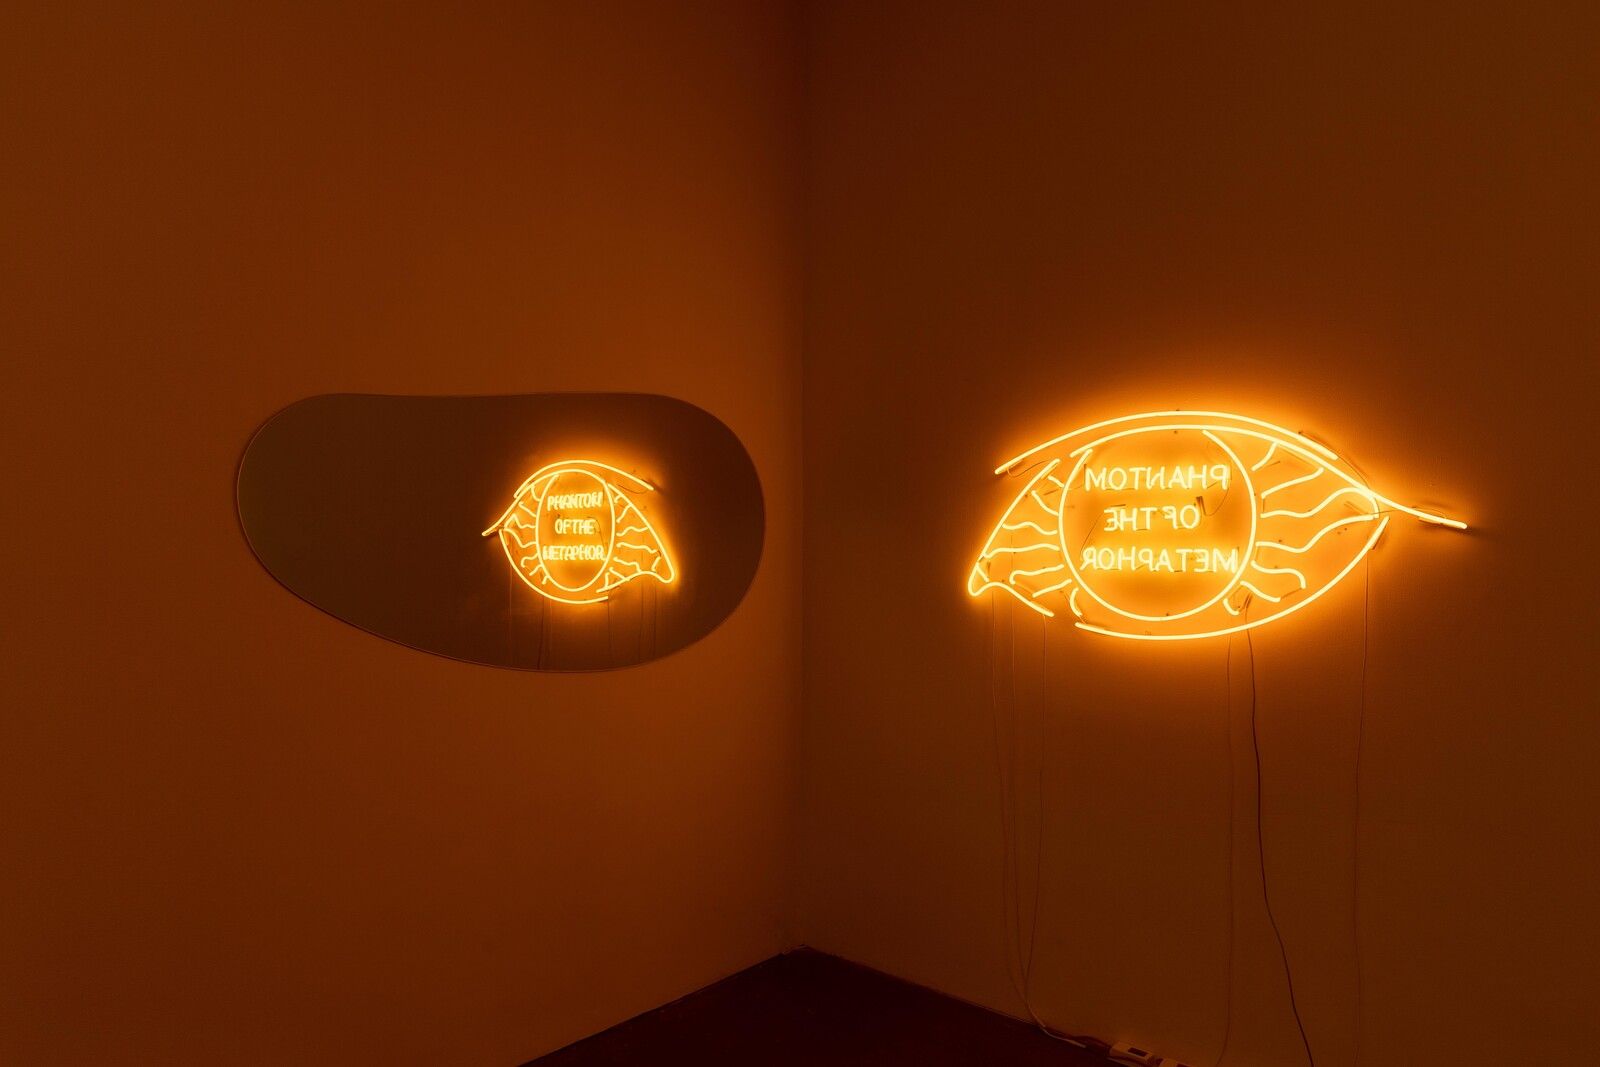 Two orange neon signs in the shape of leaves, one that says 